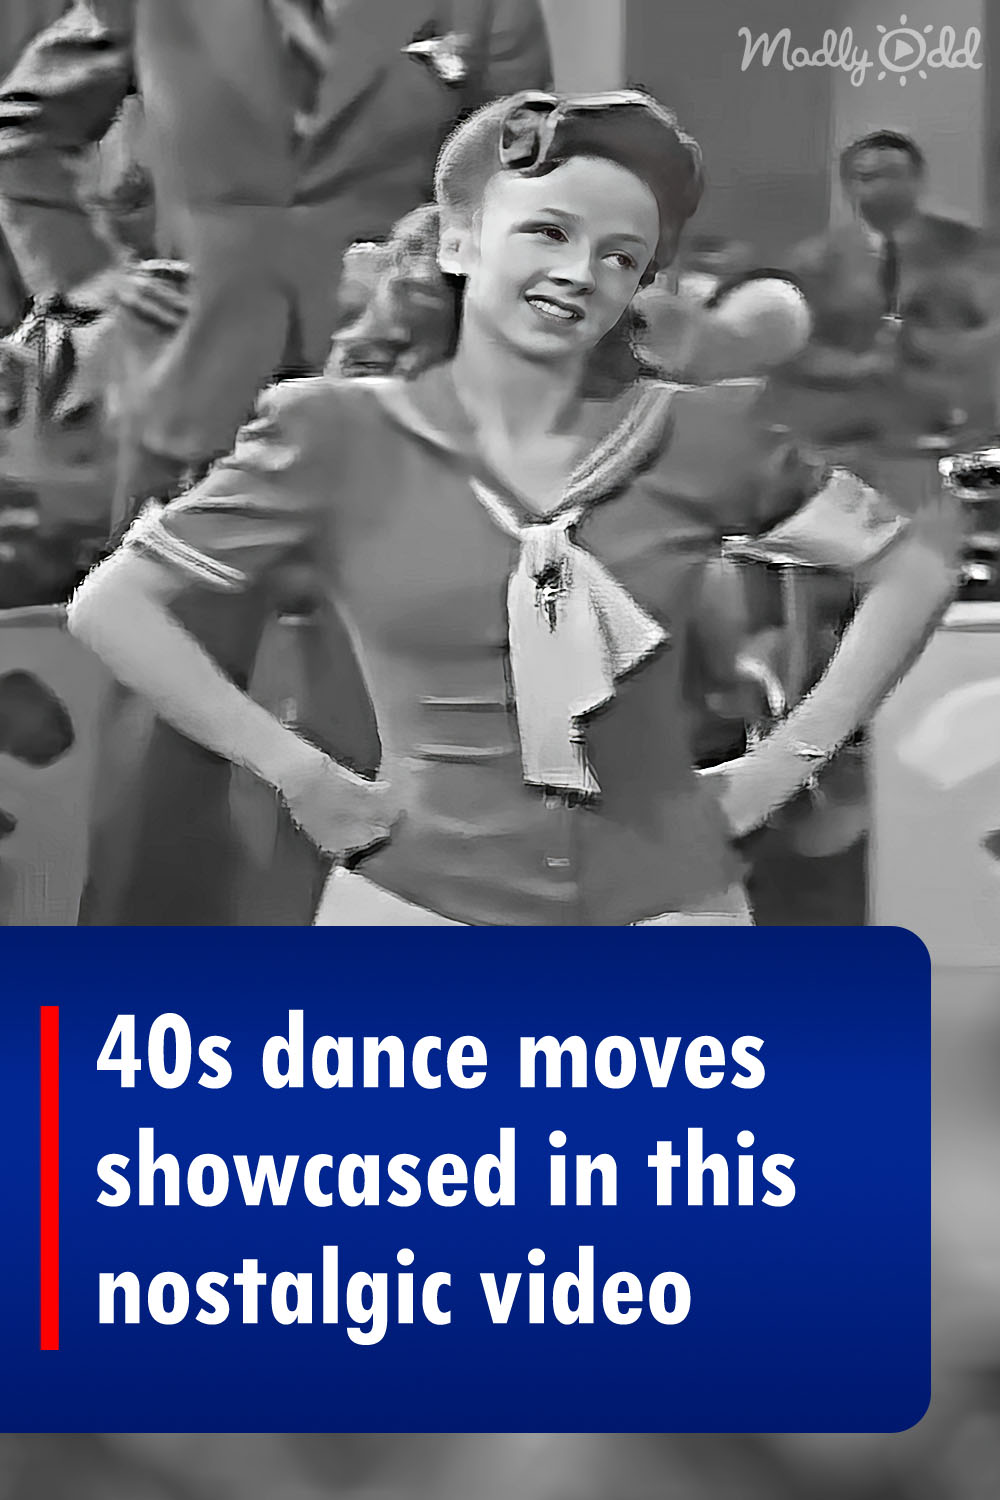 40s dance moves showcased in this nostalgic video